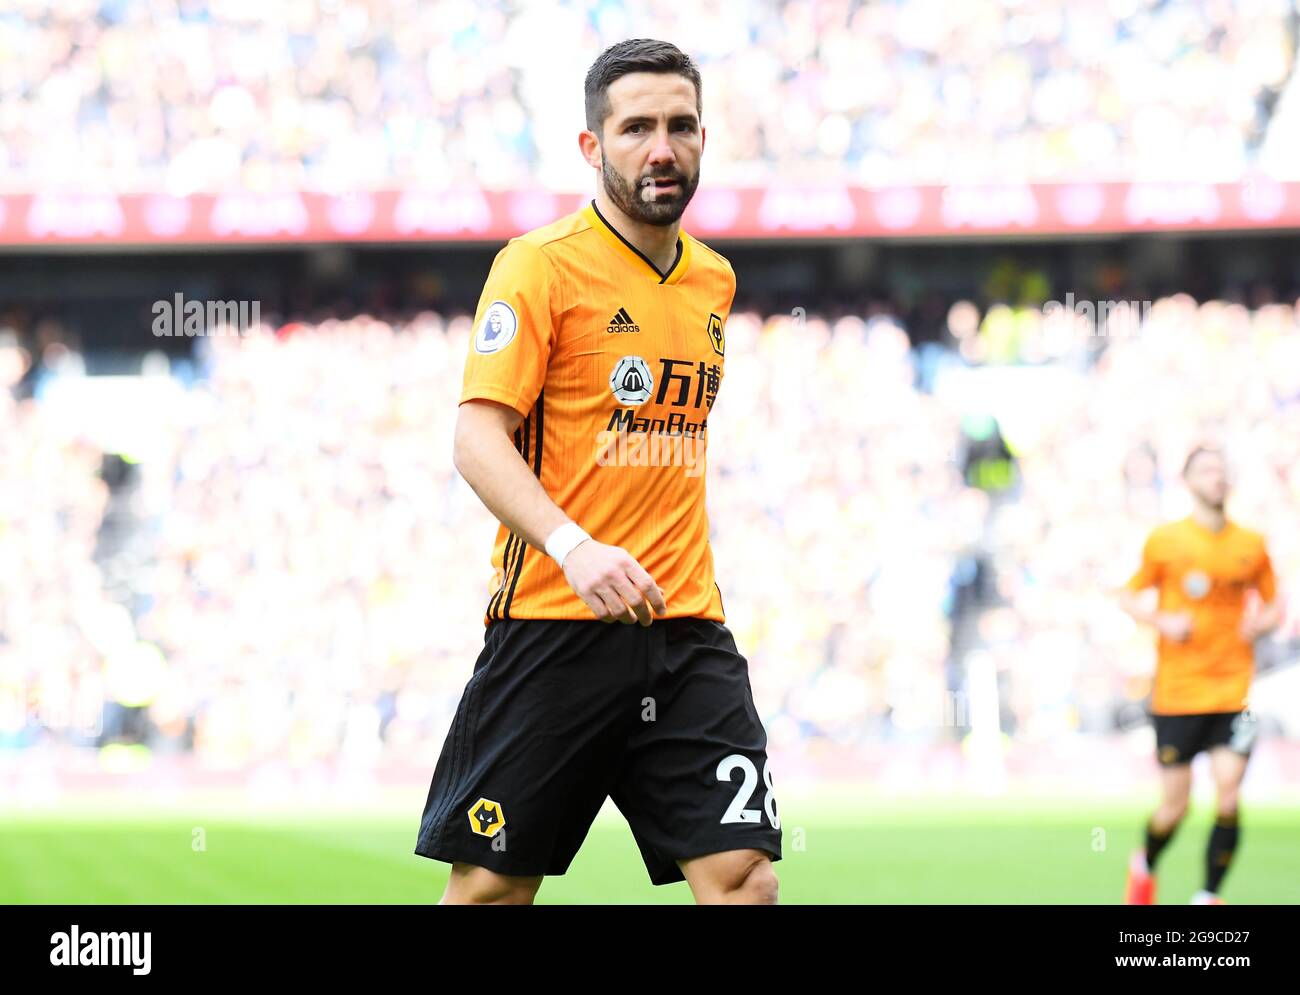 LONDON, ENGLAND - MArch 1, 2020: Joao Moutinho of Wolverhampton pictured during the 2020/21 Premier League game between Tottenham Hotspur FC and Wolverhampton FC at Tottenham Hotspur Stadium. Stock Photo